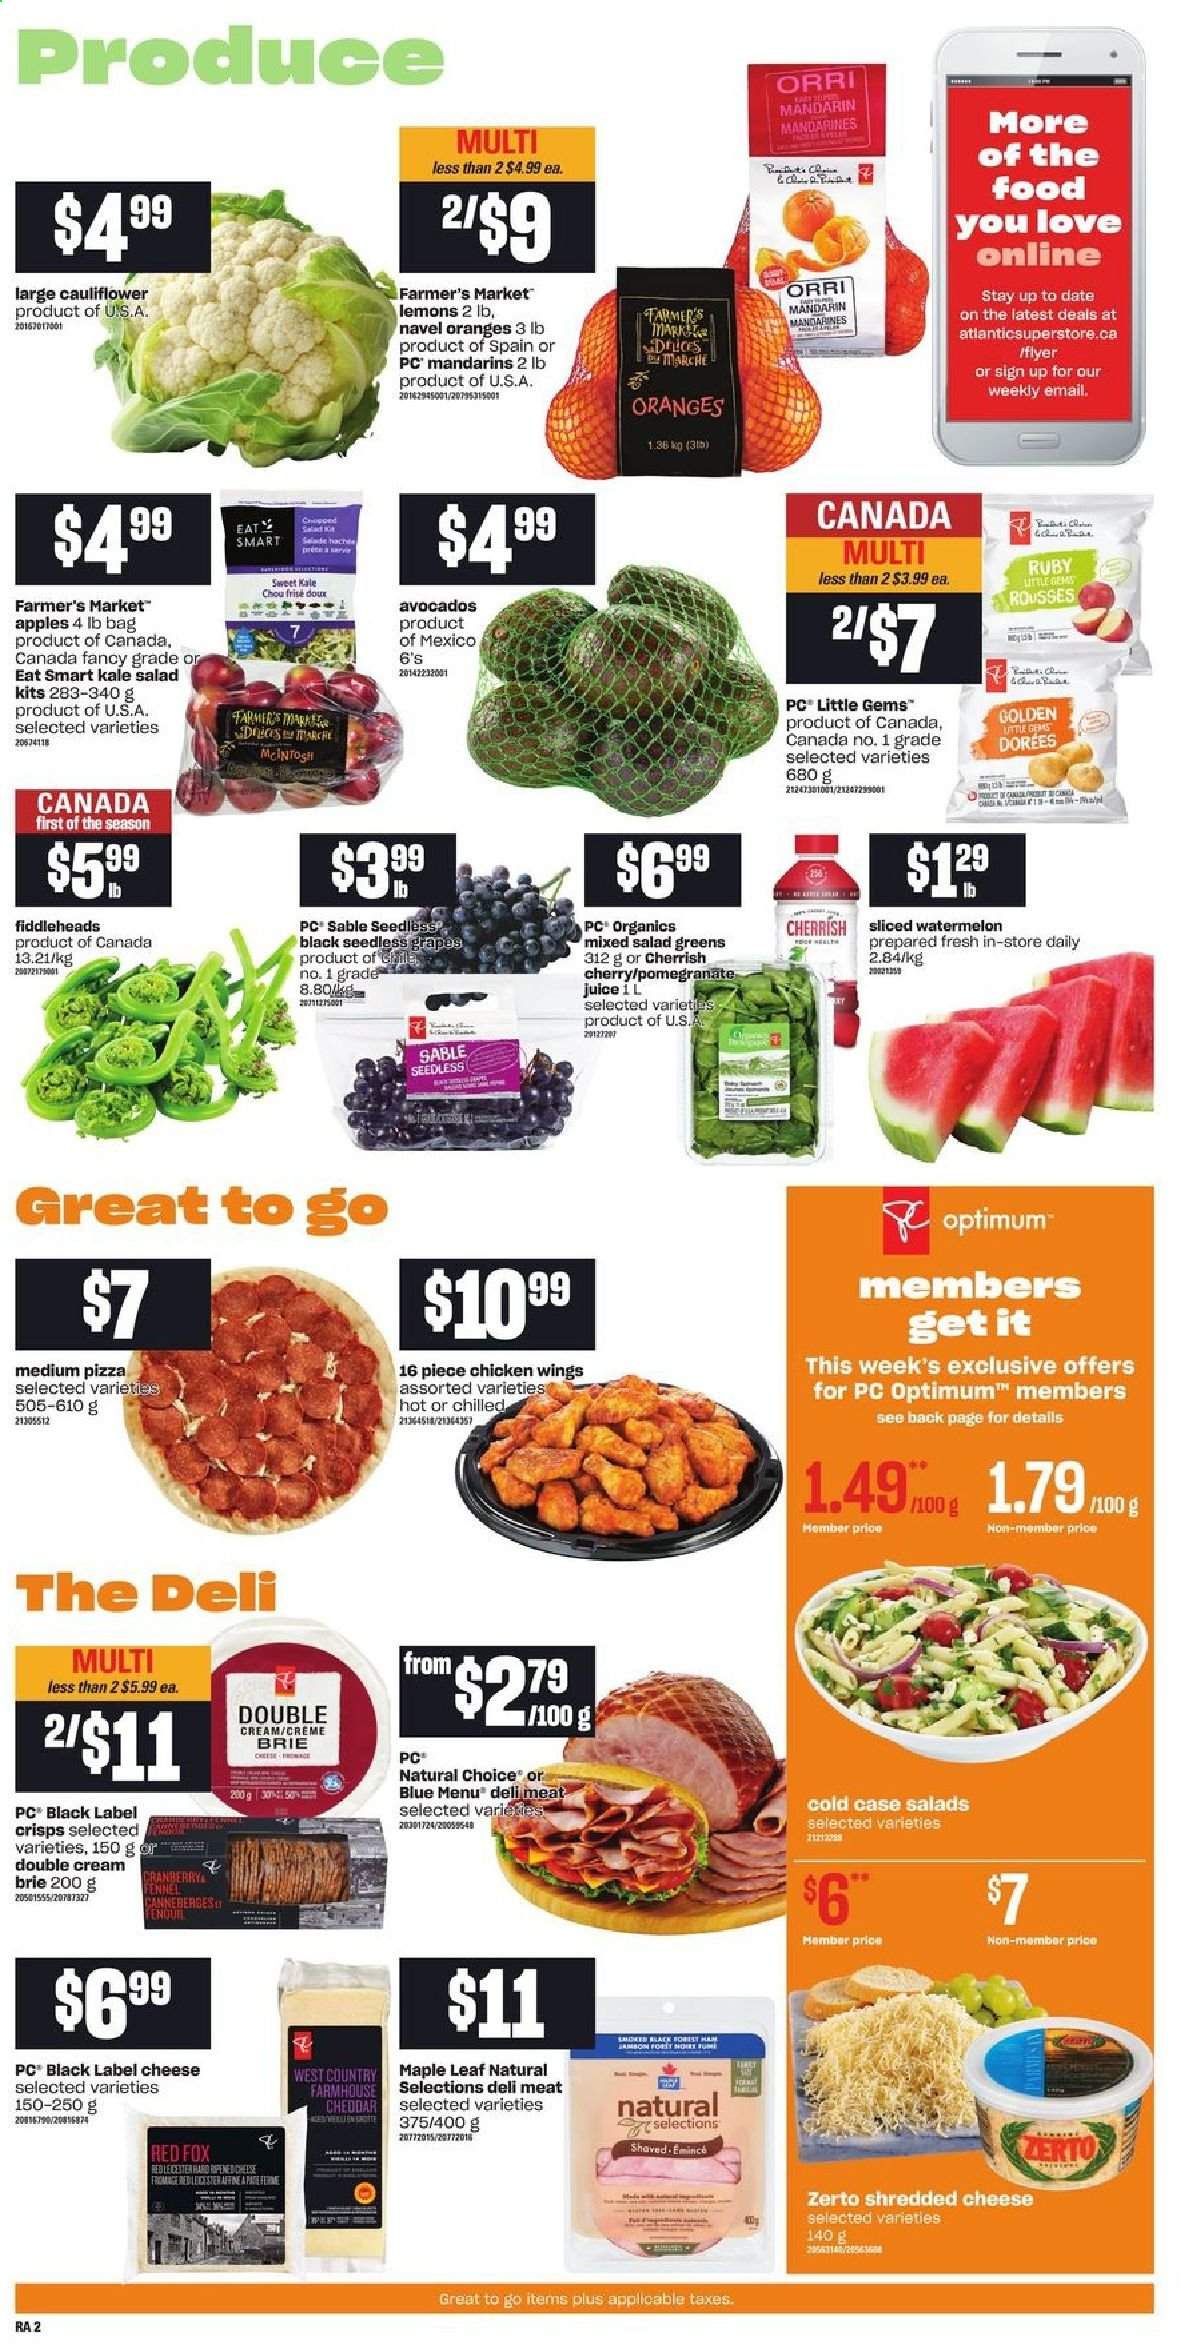 thumbnail - Atlantic Superstore Flyer - May 06, 2021 - May 12, 2021 - Sales products - kale, salad, salad greens, apples, avocado, grapes, mandarines, seedless grapes, watermelon, cherries, pomegranate, lemons, navel oranges, pizza, shredded cheese, cheddar, brie, chicken wings, fennel, juice, bag, Optimum. Page 3.